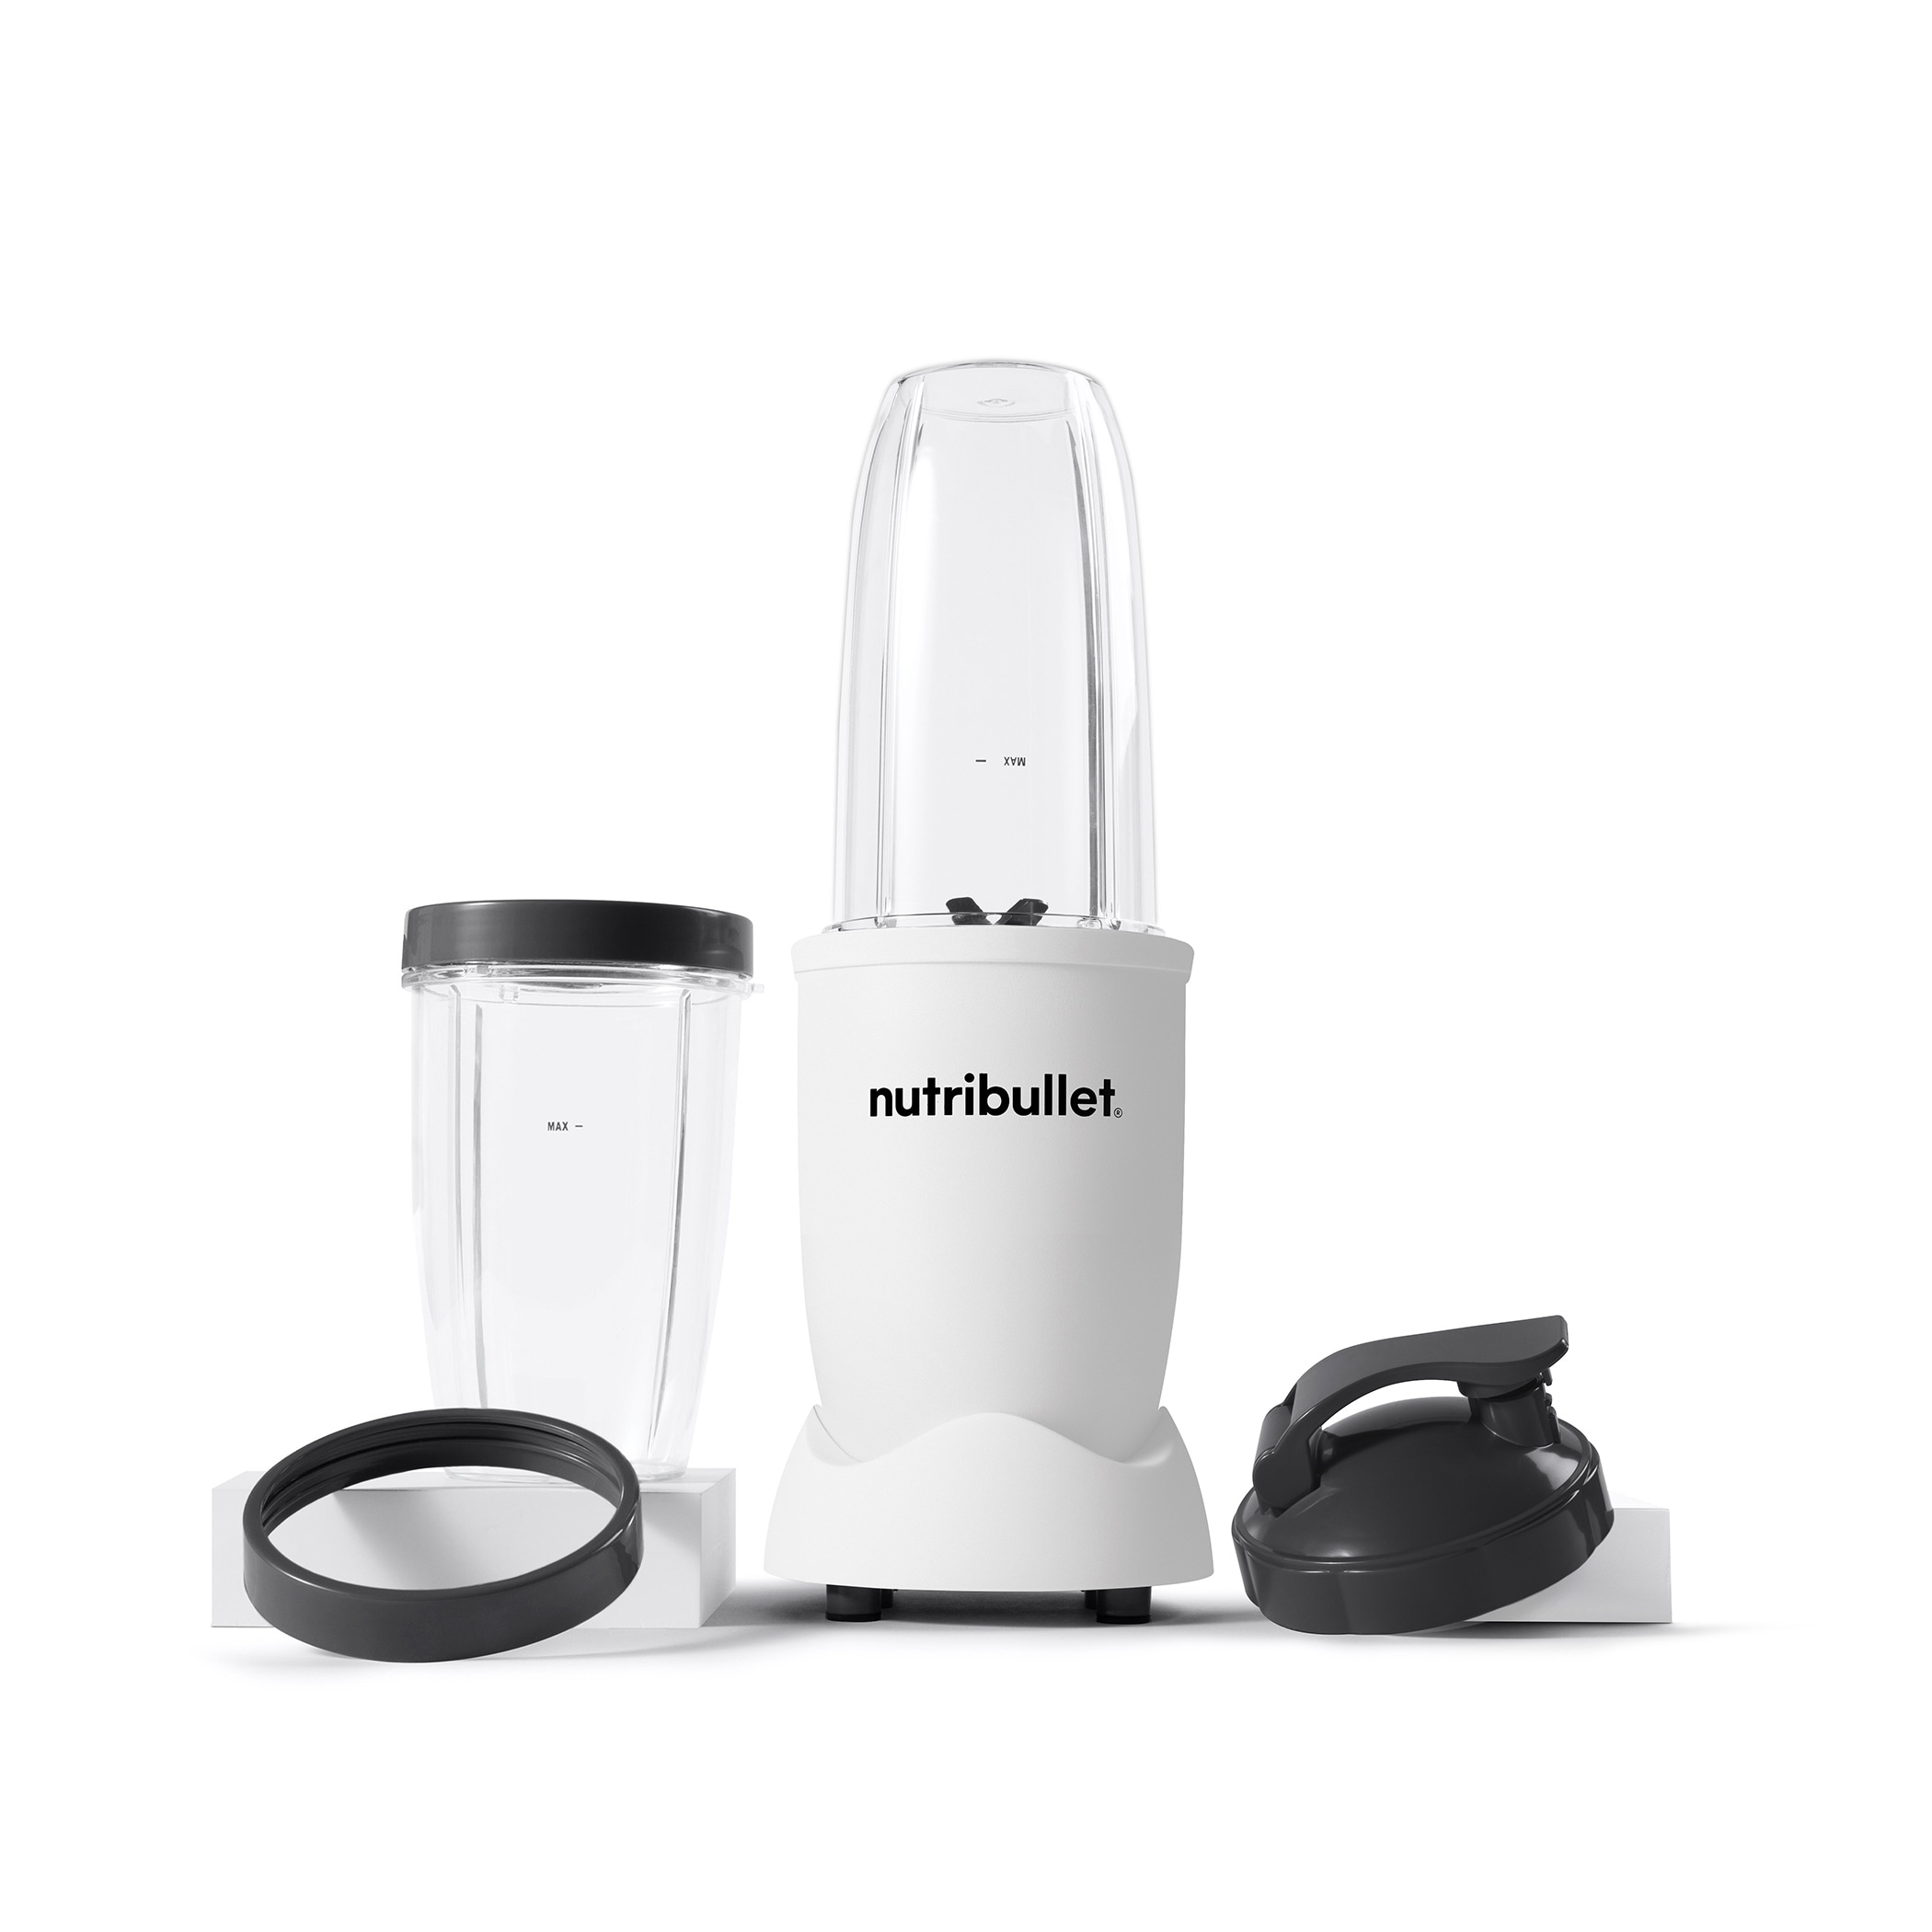 https://ak1.ostkcdn.com/images/products/is/images/direct/a1be855c538d4ddbb969ed1bc5b439b3a458287d/NB90901AW-nutribullet-Pro%2C-Matte-White.jpg